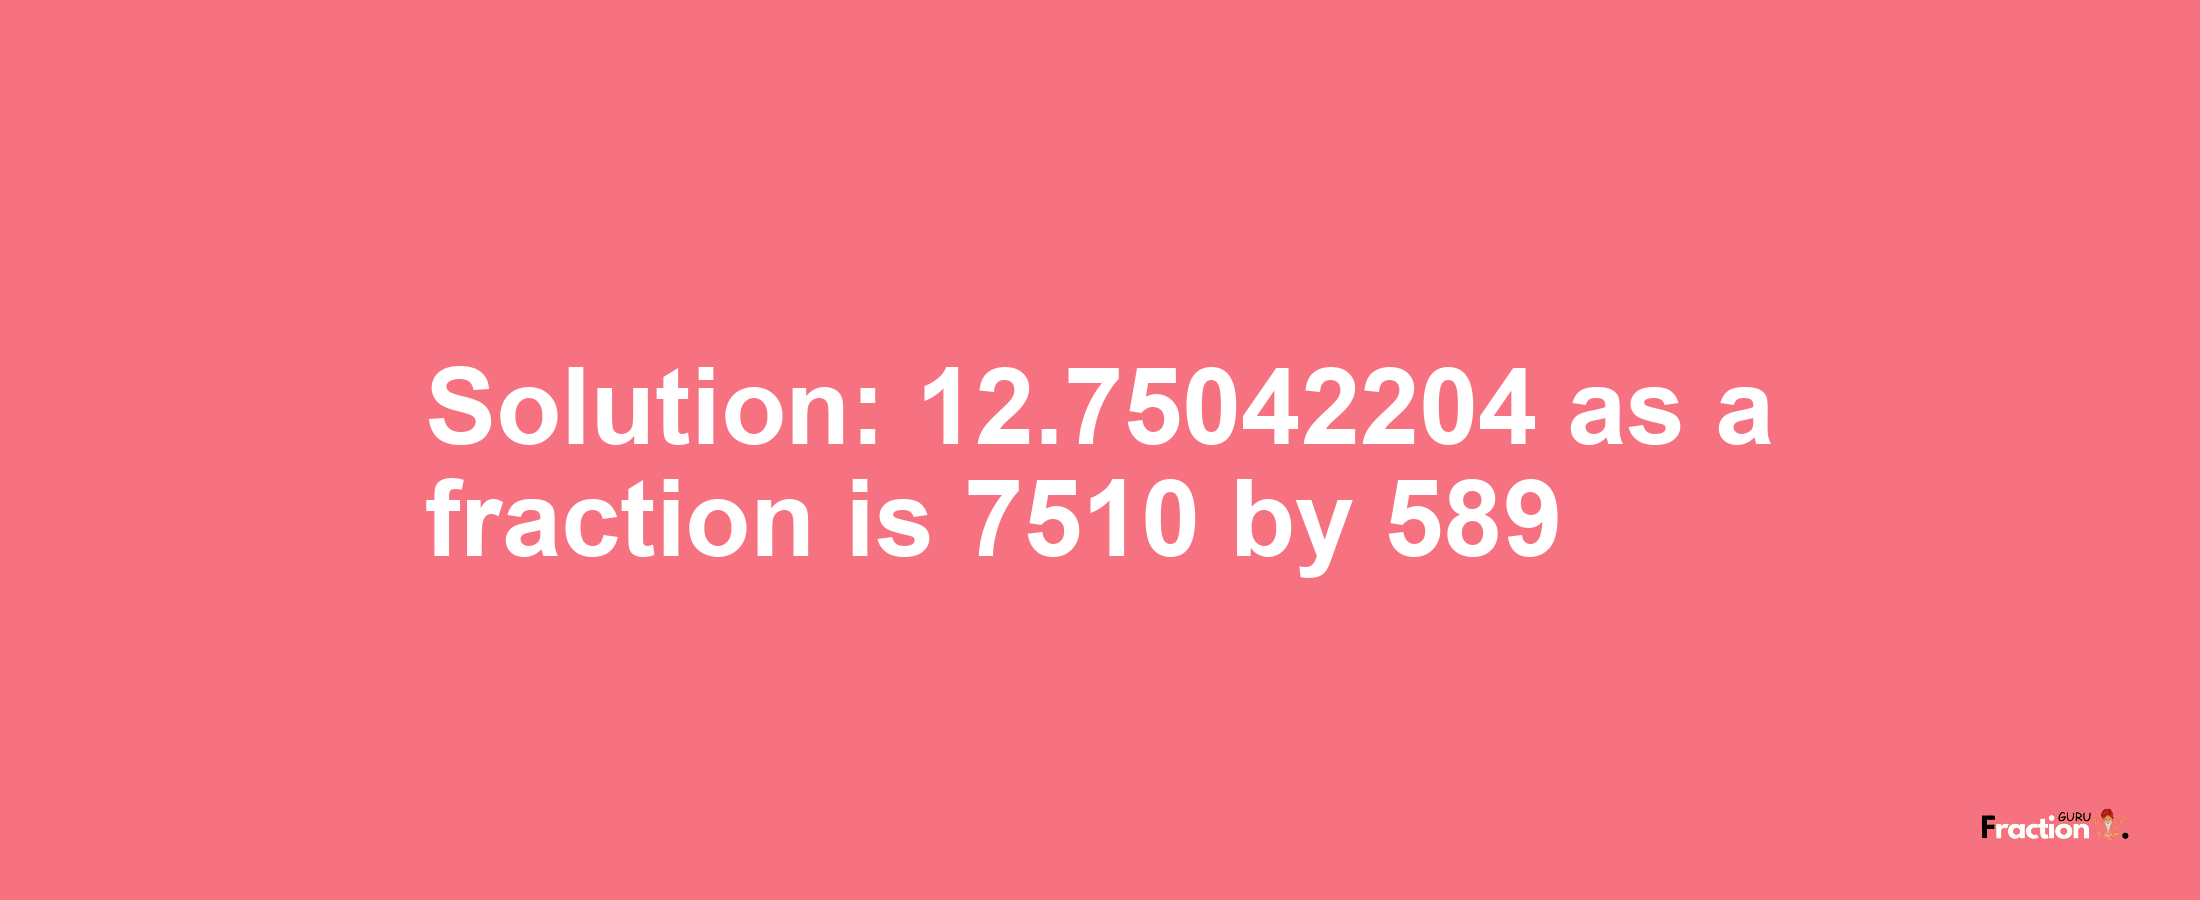 Solution:12.75042204 as a fraction is 7510/589